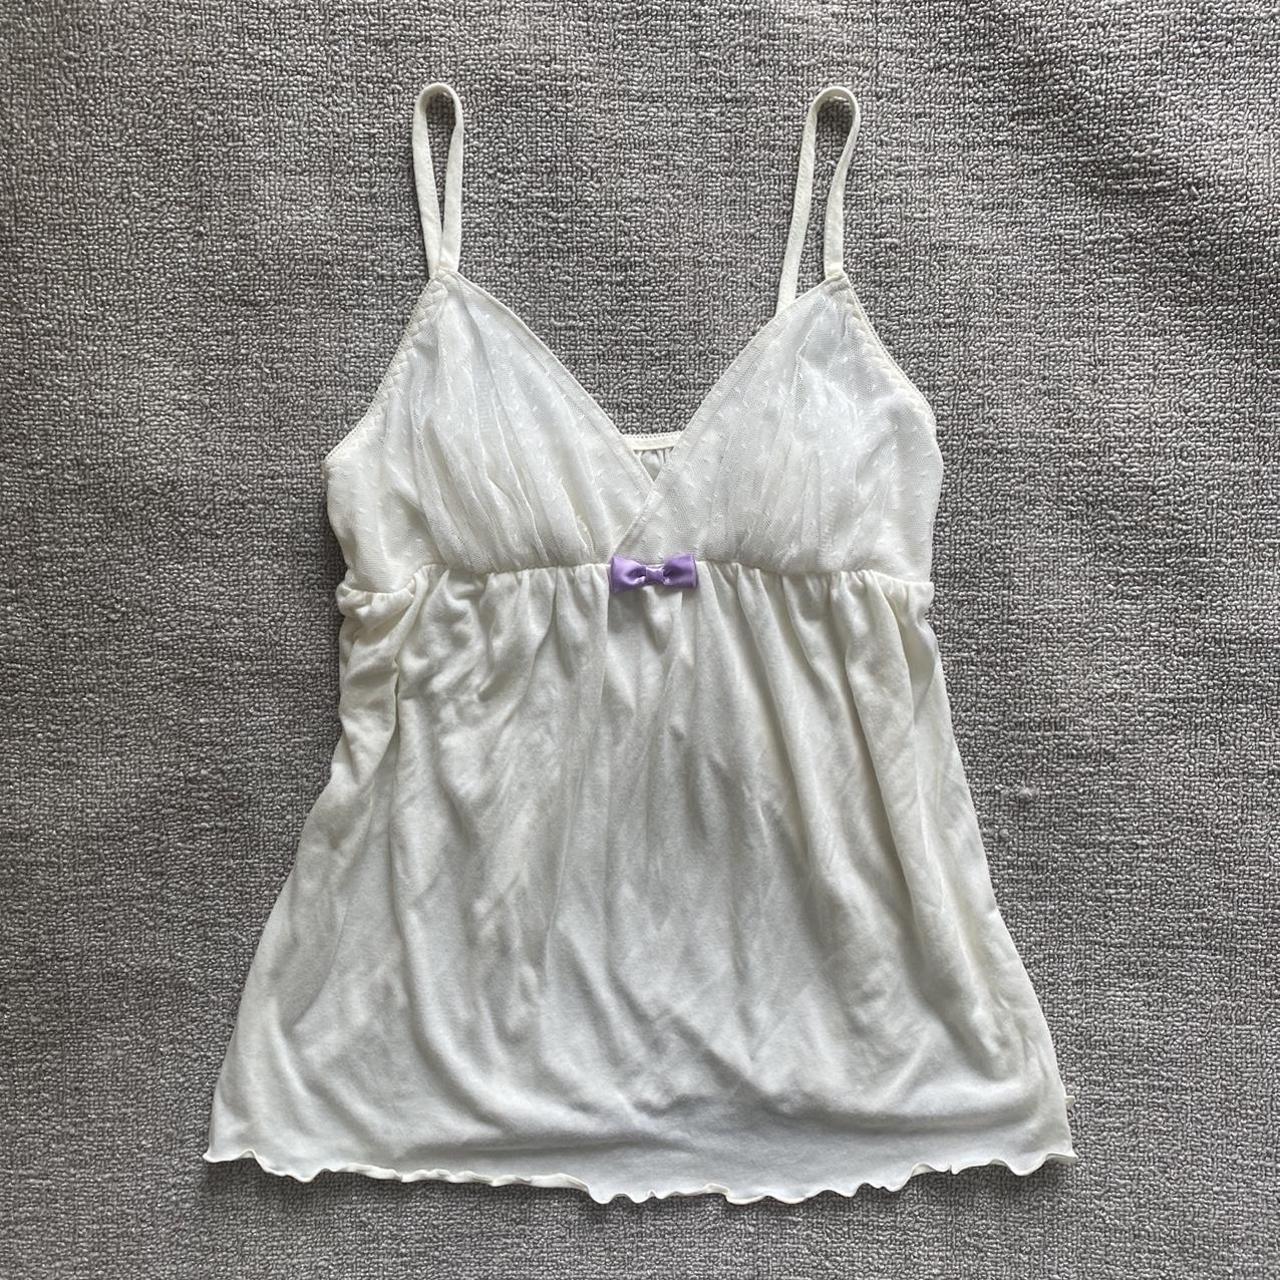 Coquette japanese babydoll cami top, lace overlay,... - Depop